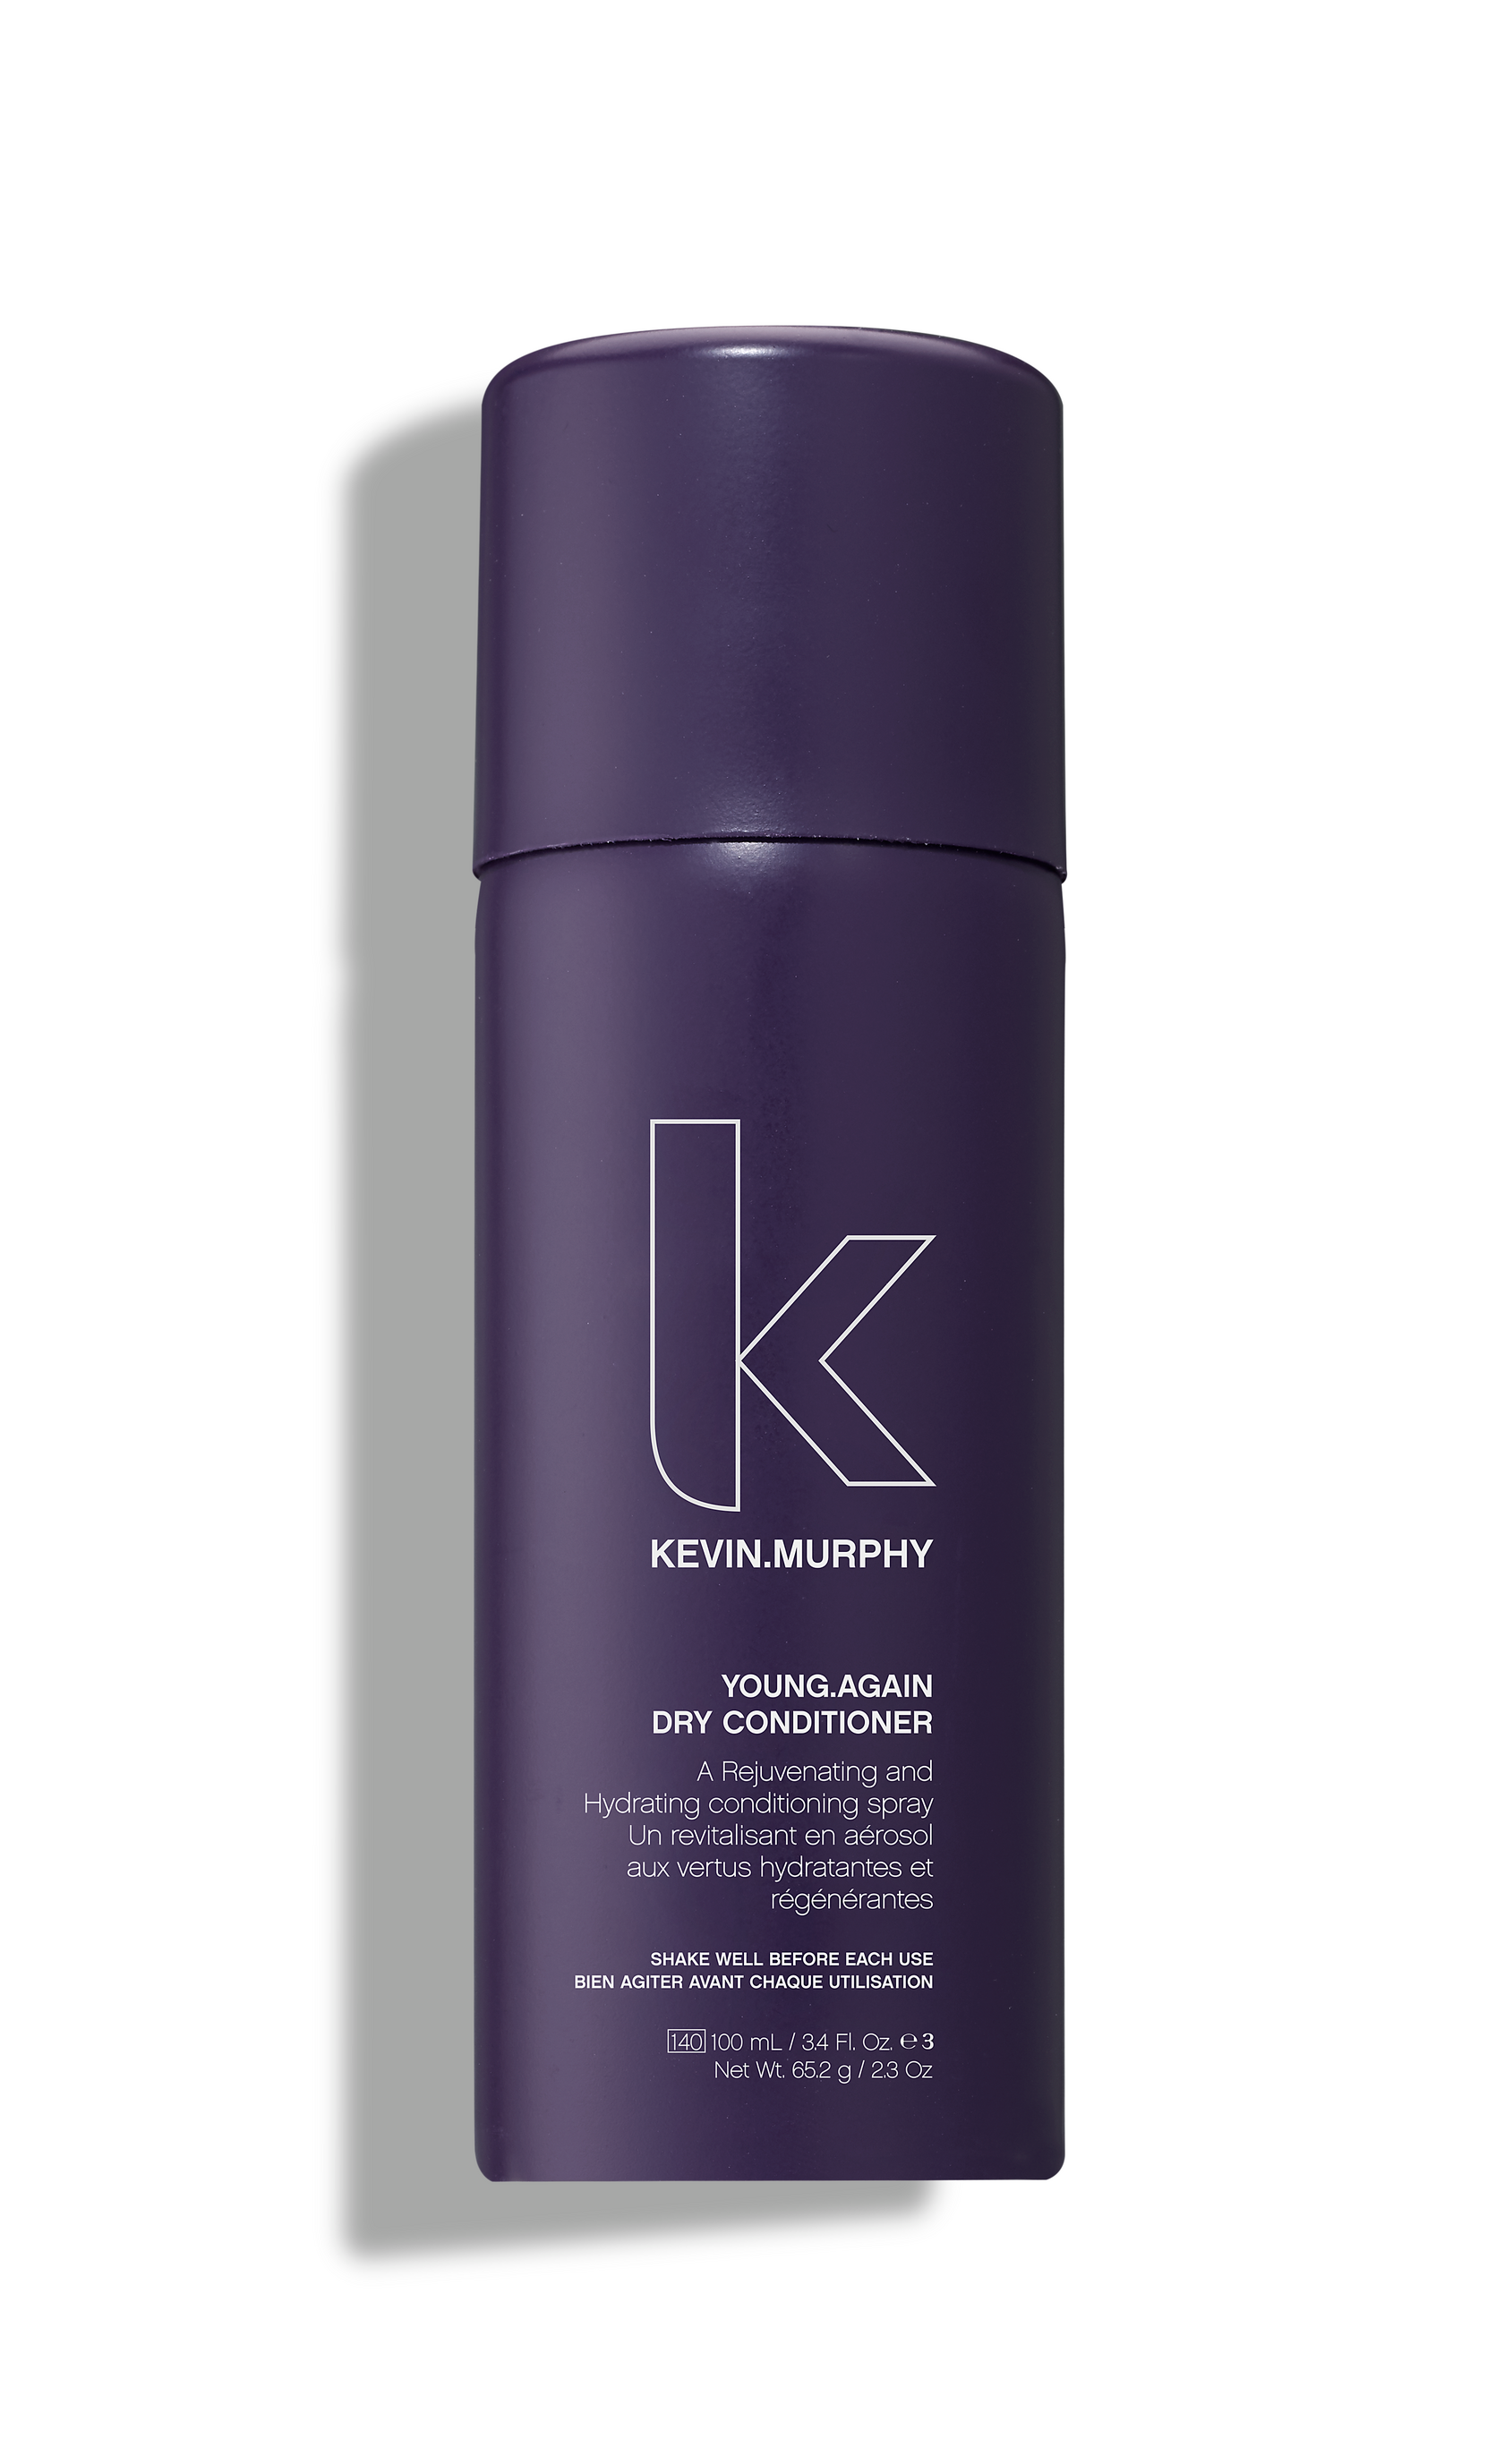 Young.again Dry Conditioner Kevin.Murphy 100мл. Спрей Kevin Murphy для волос на волосах. Kevin Murphy 8.31. Kevin Murphy young again. Косметика для волос кевин